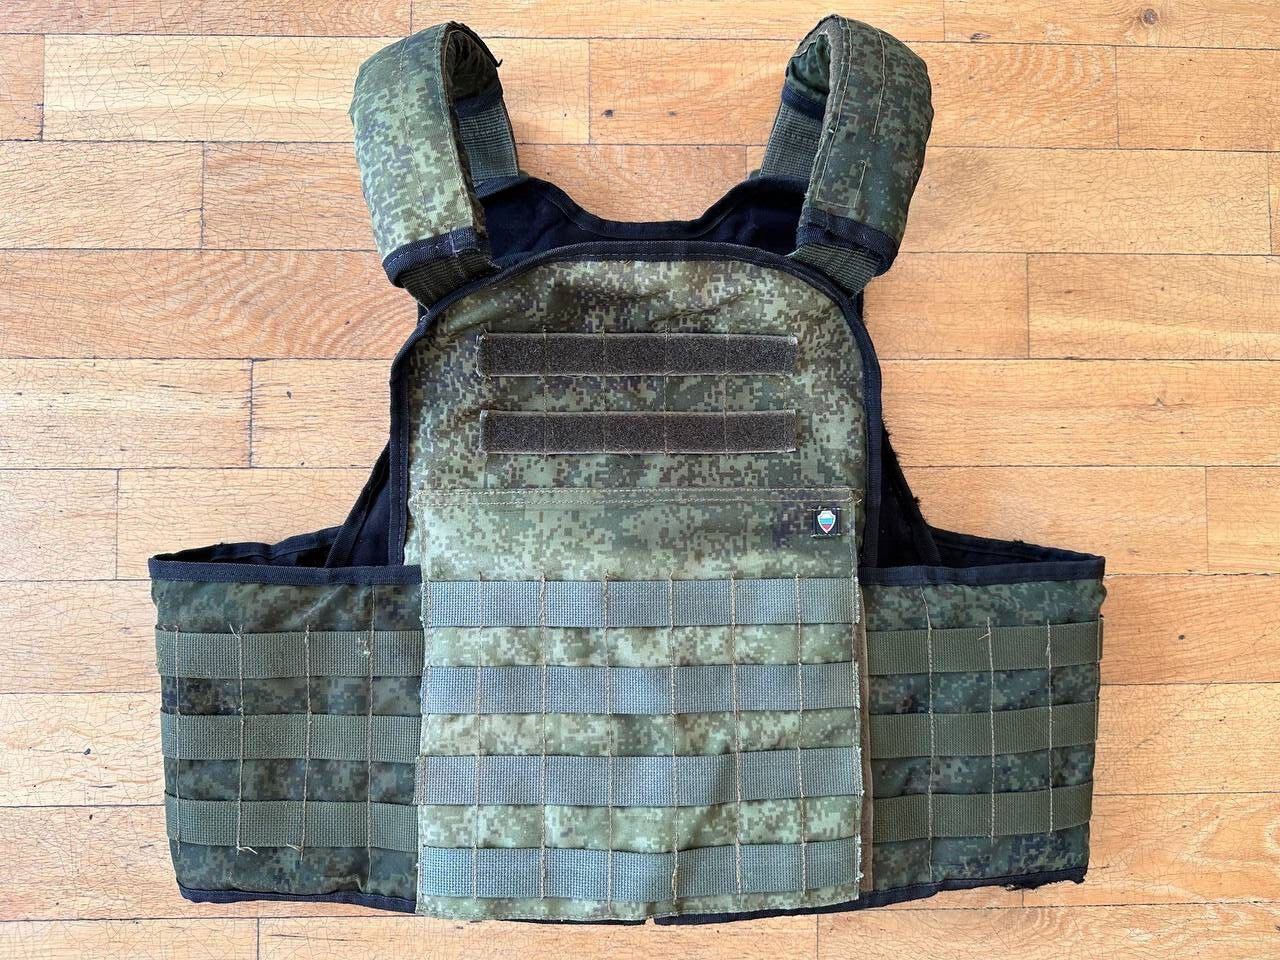 Original Military Russian Army plate holder carrier molle vest Modul Monolit BR4